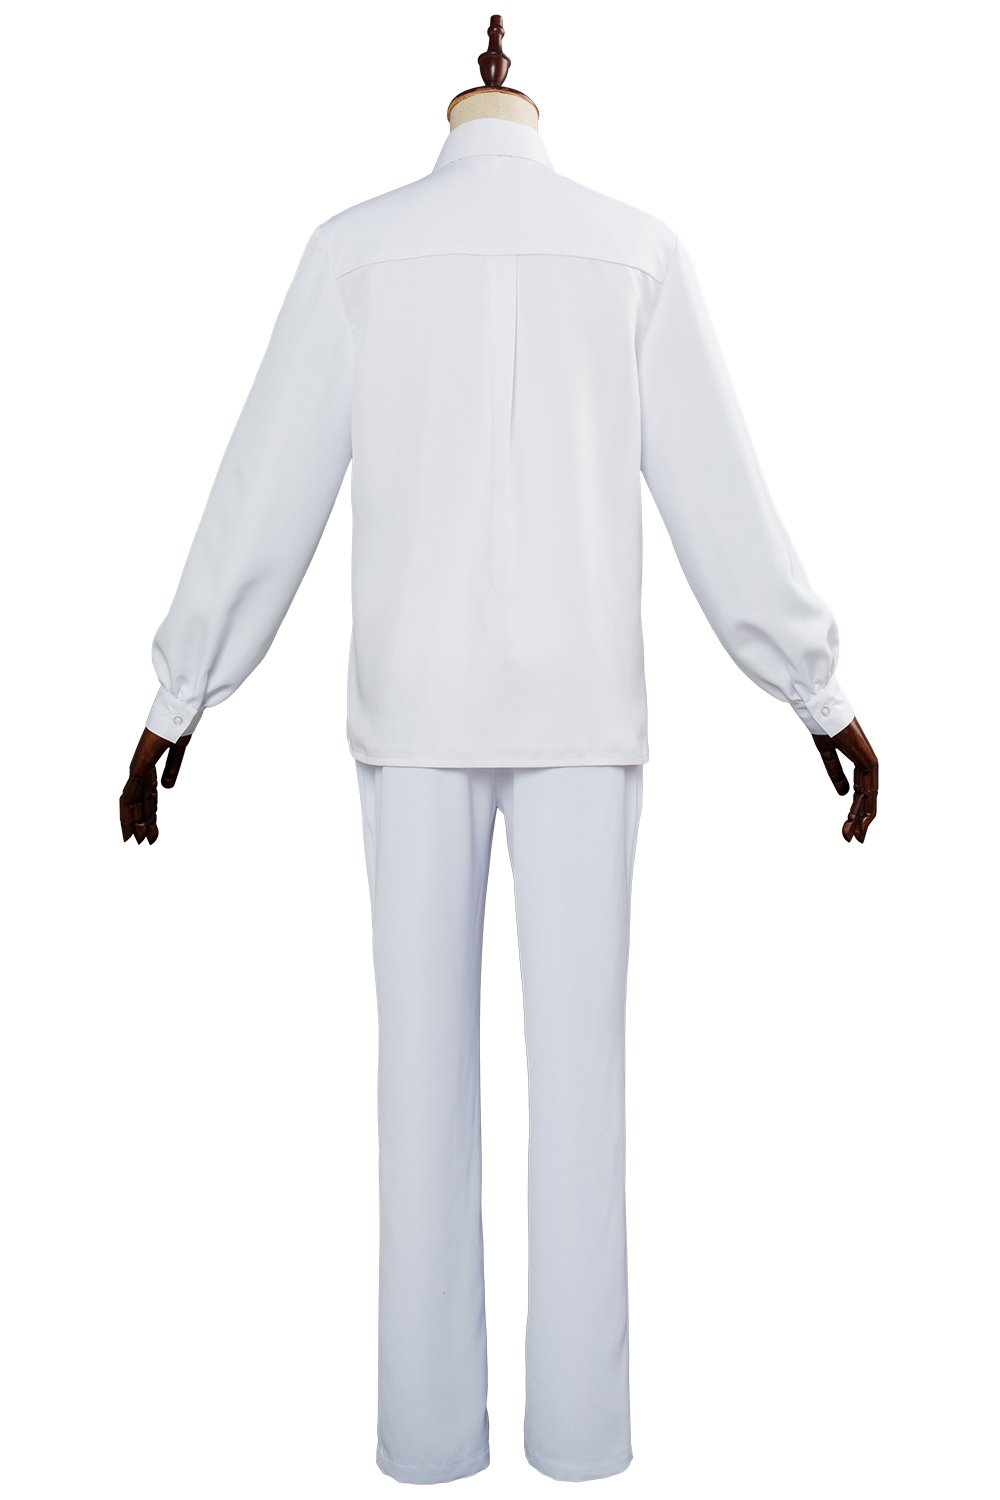 The Promised Neverland Male Norman Ray Cosplay Costume